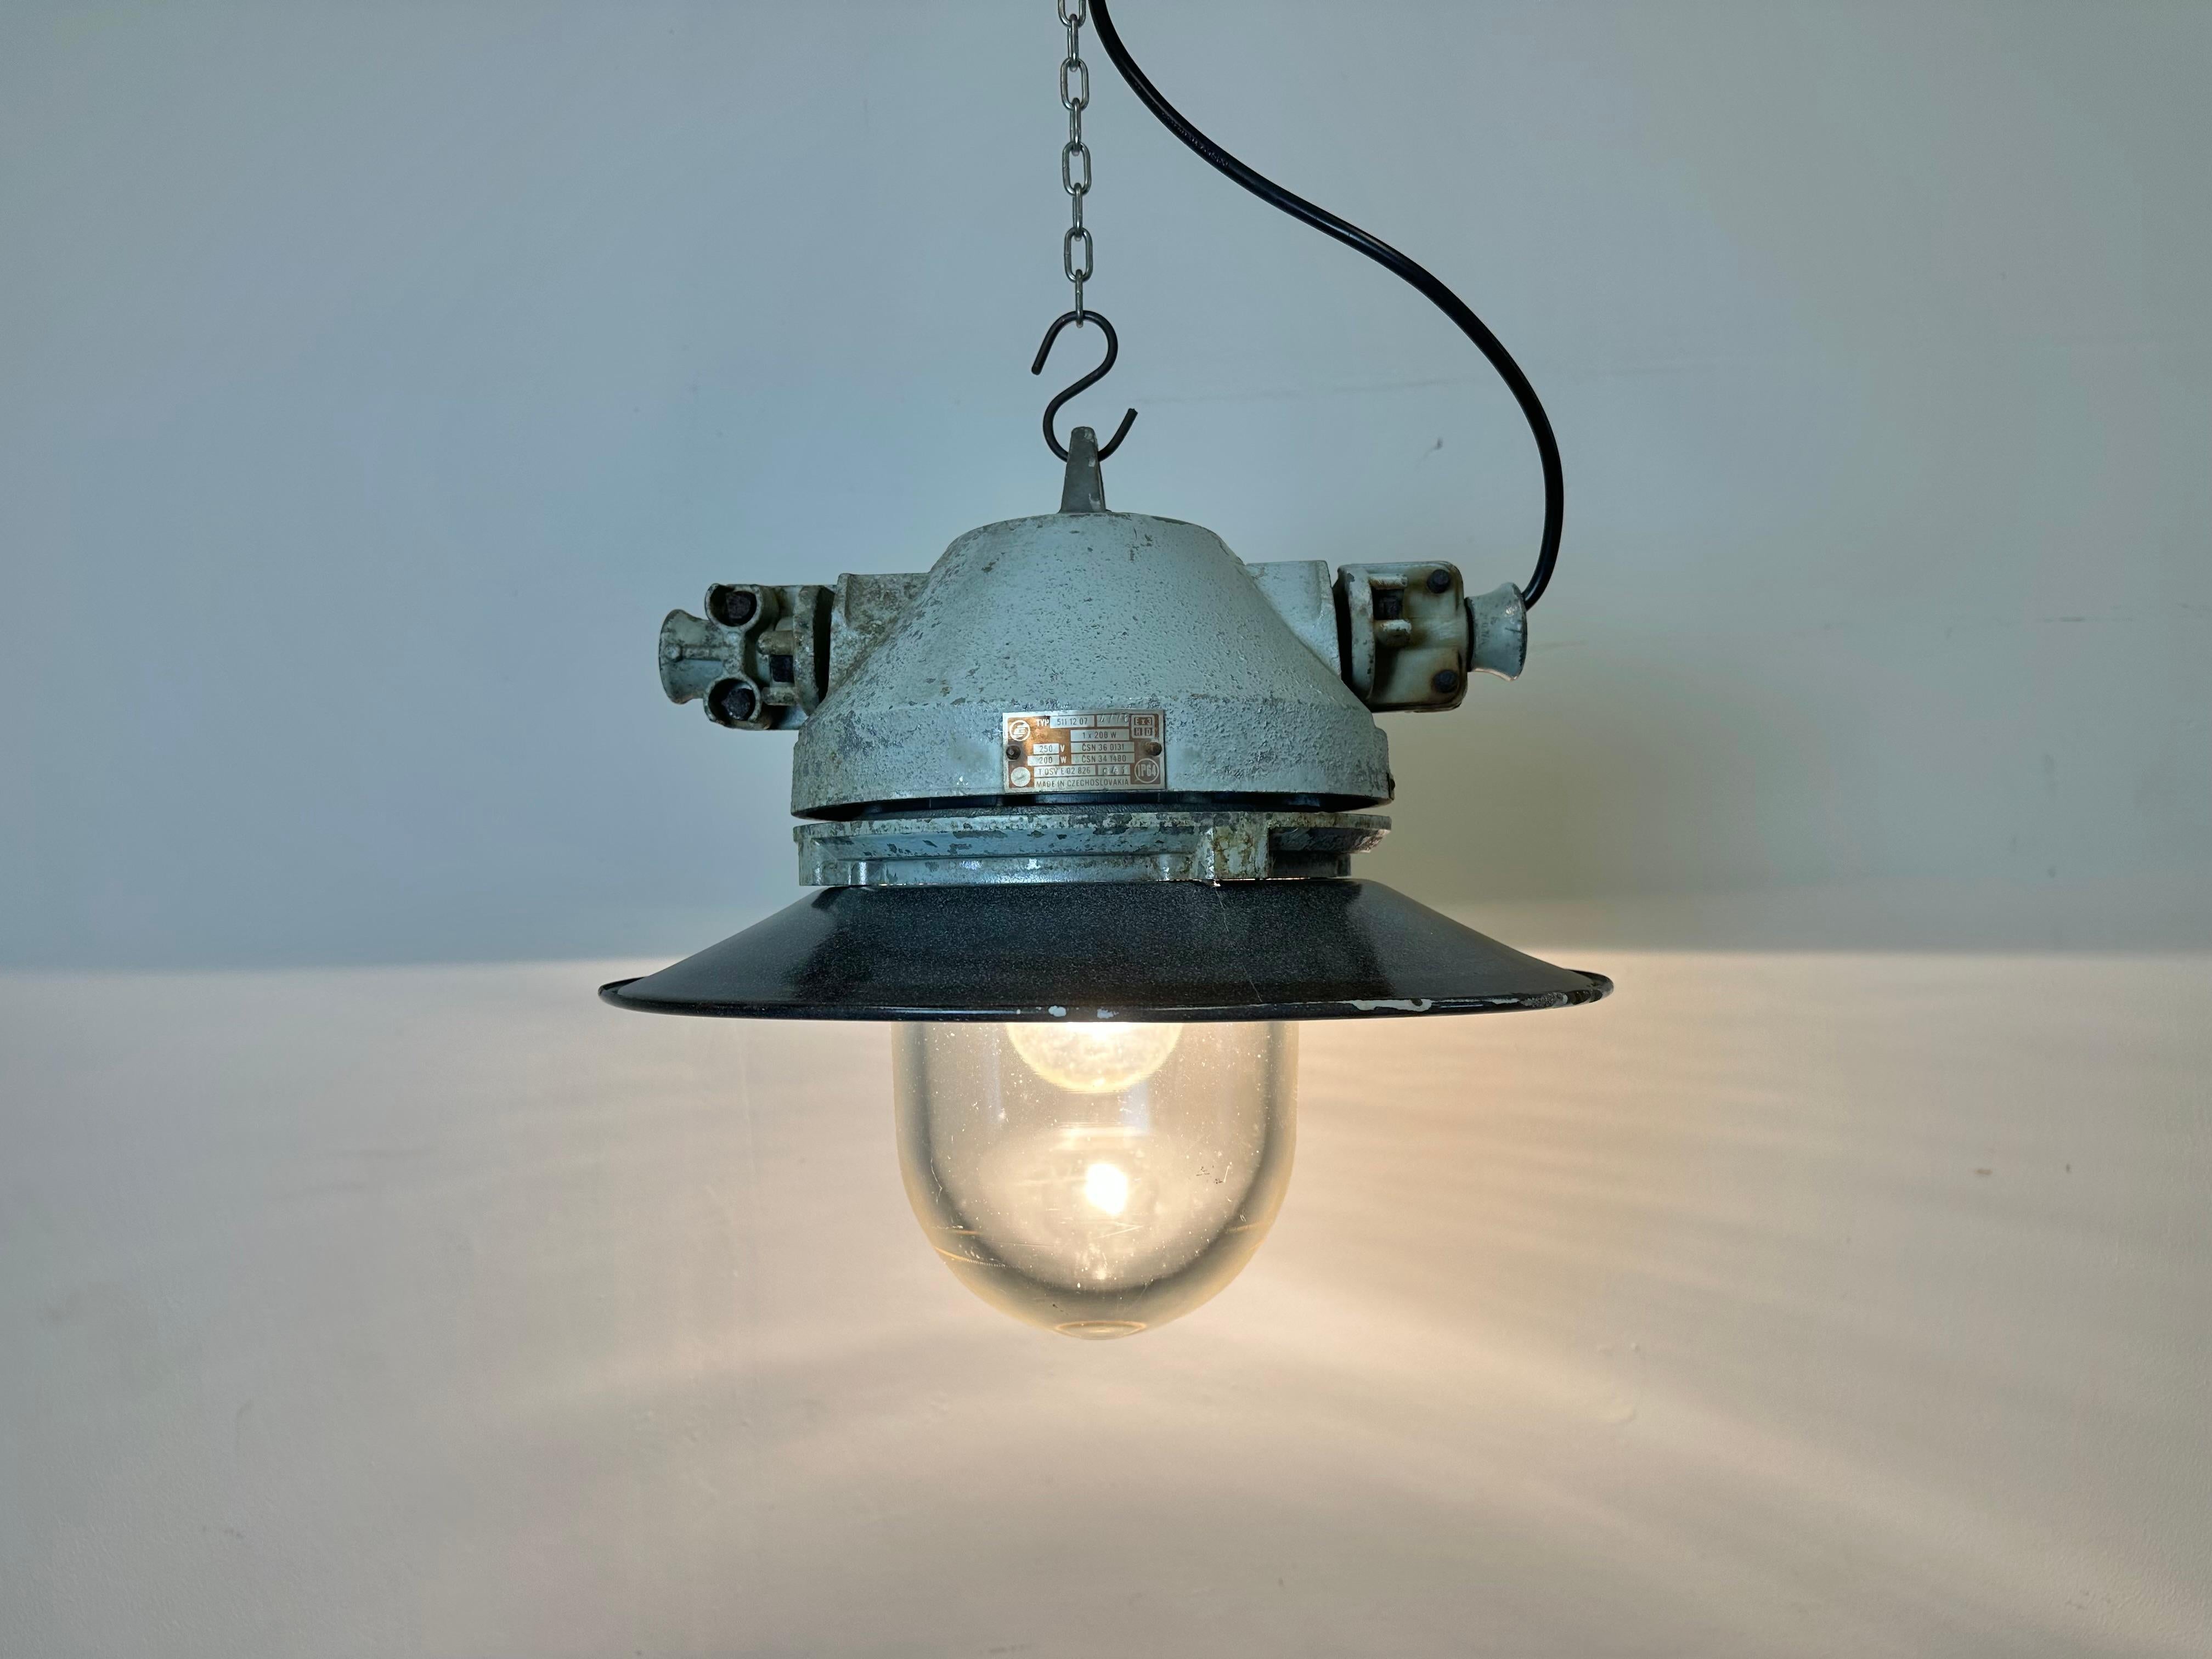 Grey Cast Aluminium Explosion Proof Lamp with Enameled Shade, 1970s For Sale 6